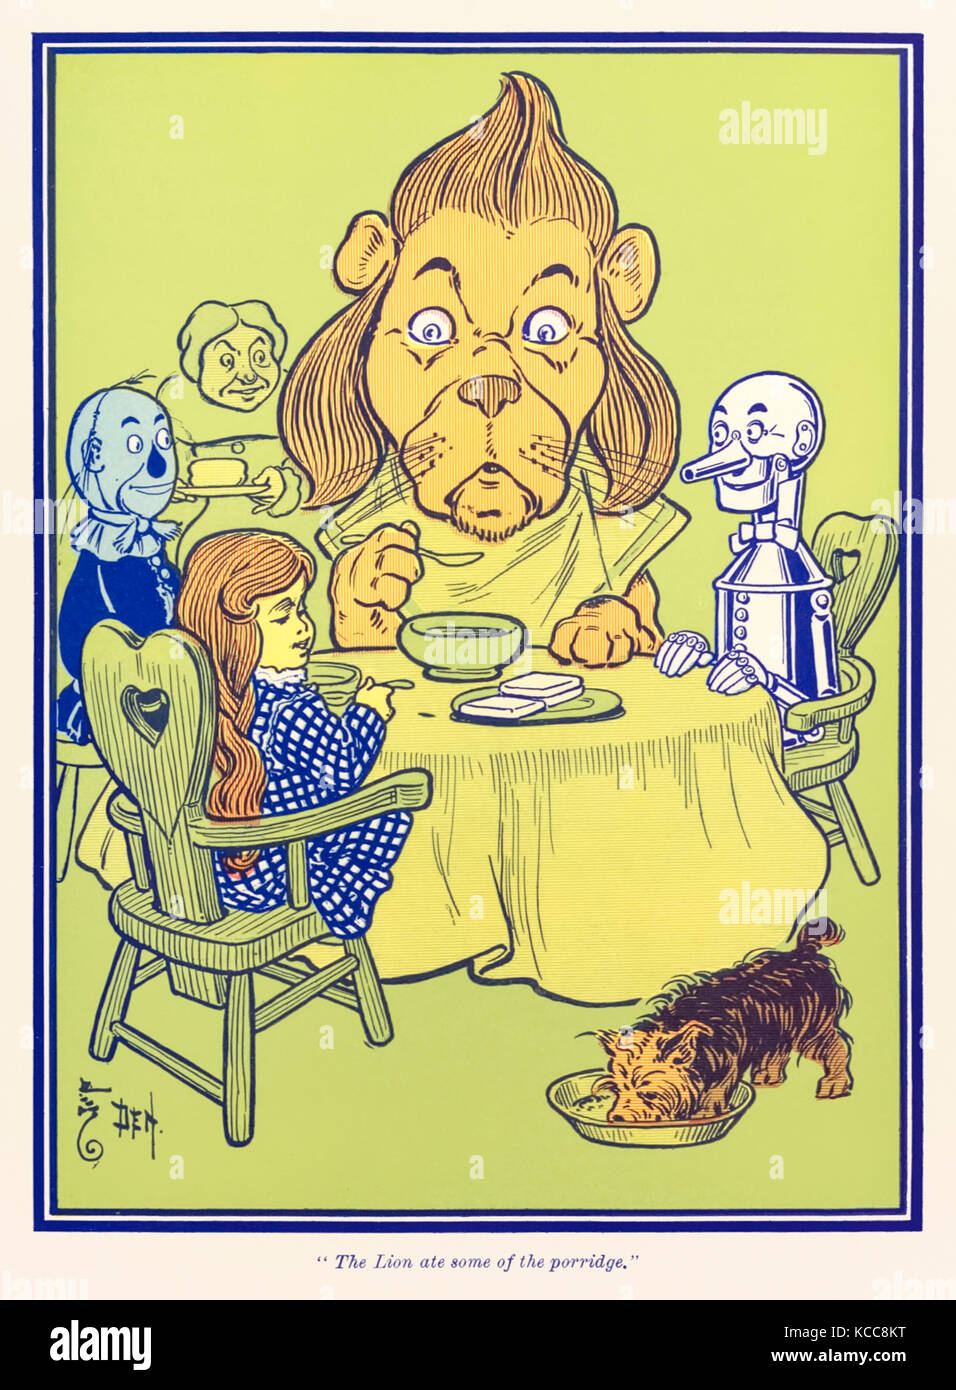 “The Lion ate some of the porridge.” from ‘The Wonderful Wizard of Oz’ by L. Frank Baum (1856-1919) with pictures by W. W. Denslow (1856-1915). See more information below. Stock Photo